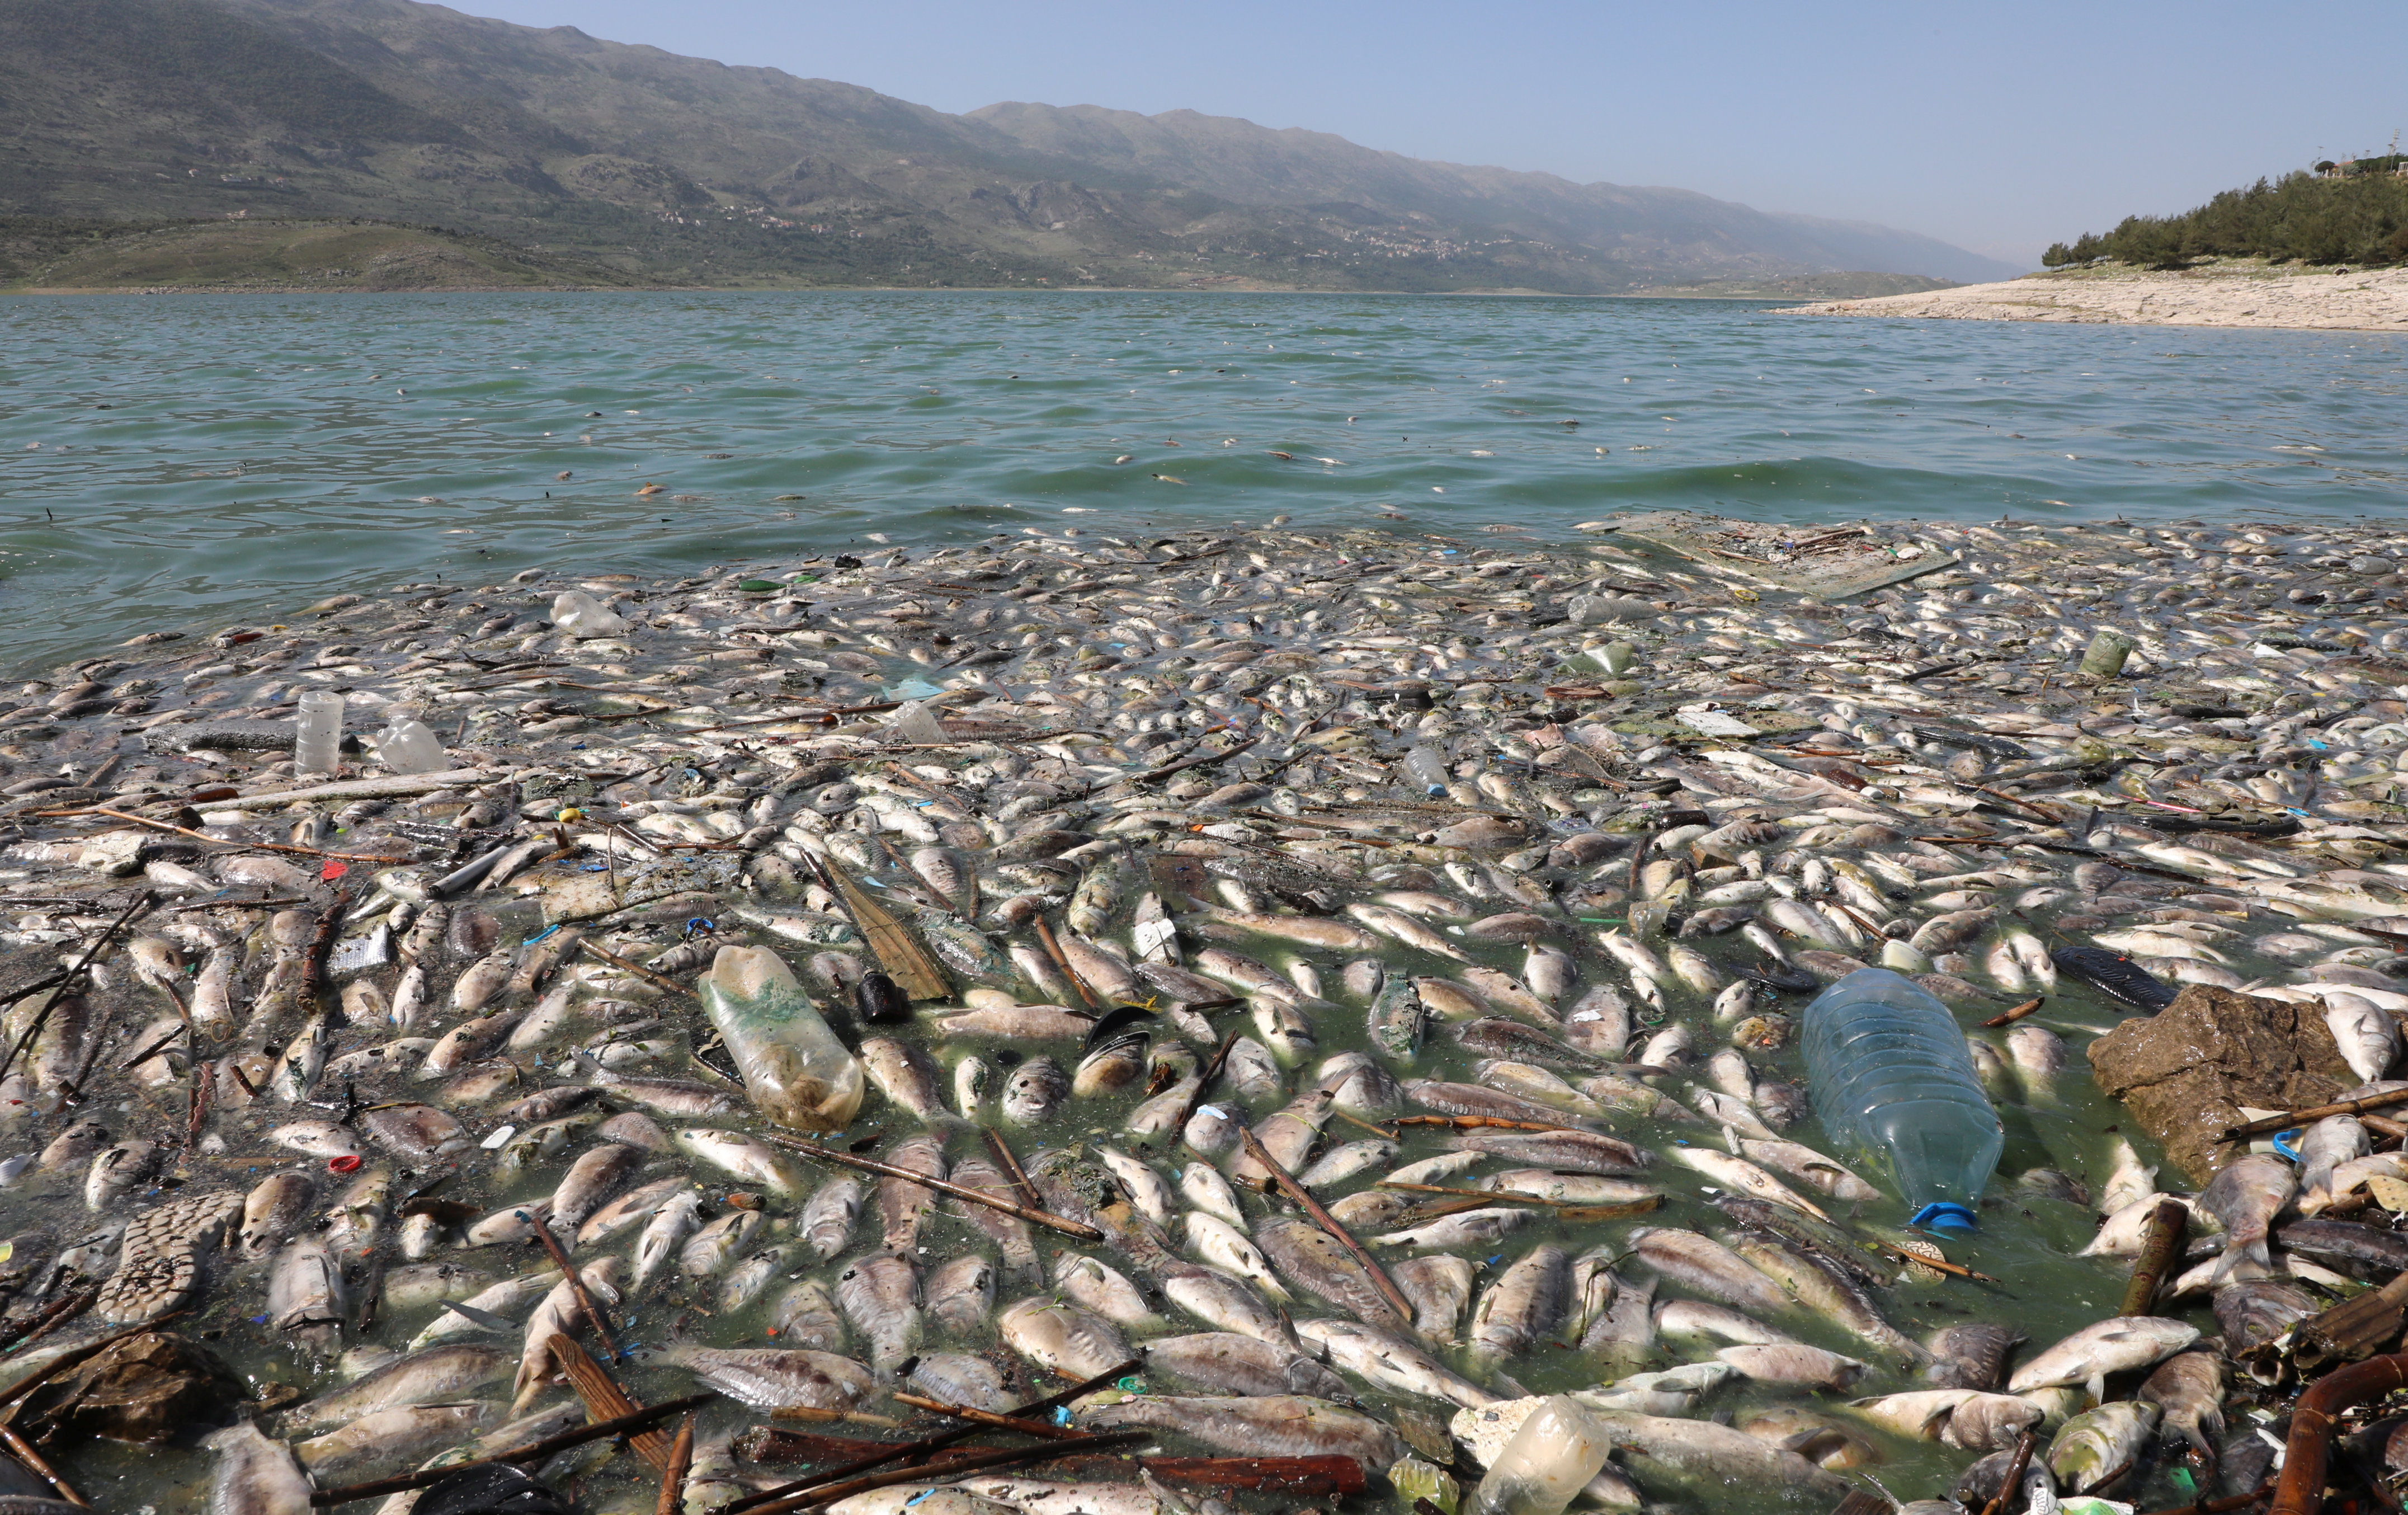 Tonnes of dead fish wash up on shore of polluted Lebanese lake | Reuters